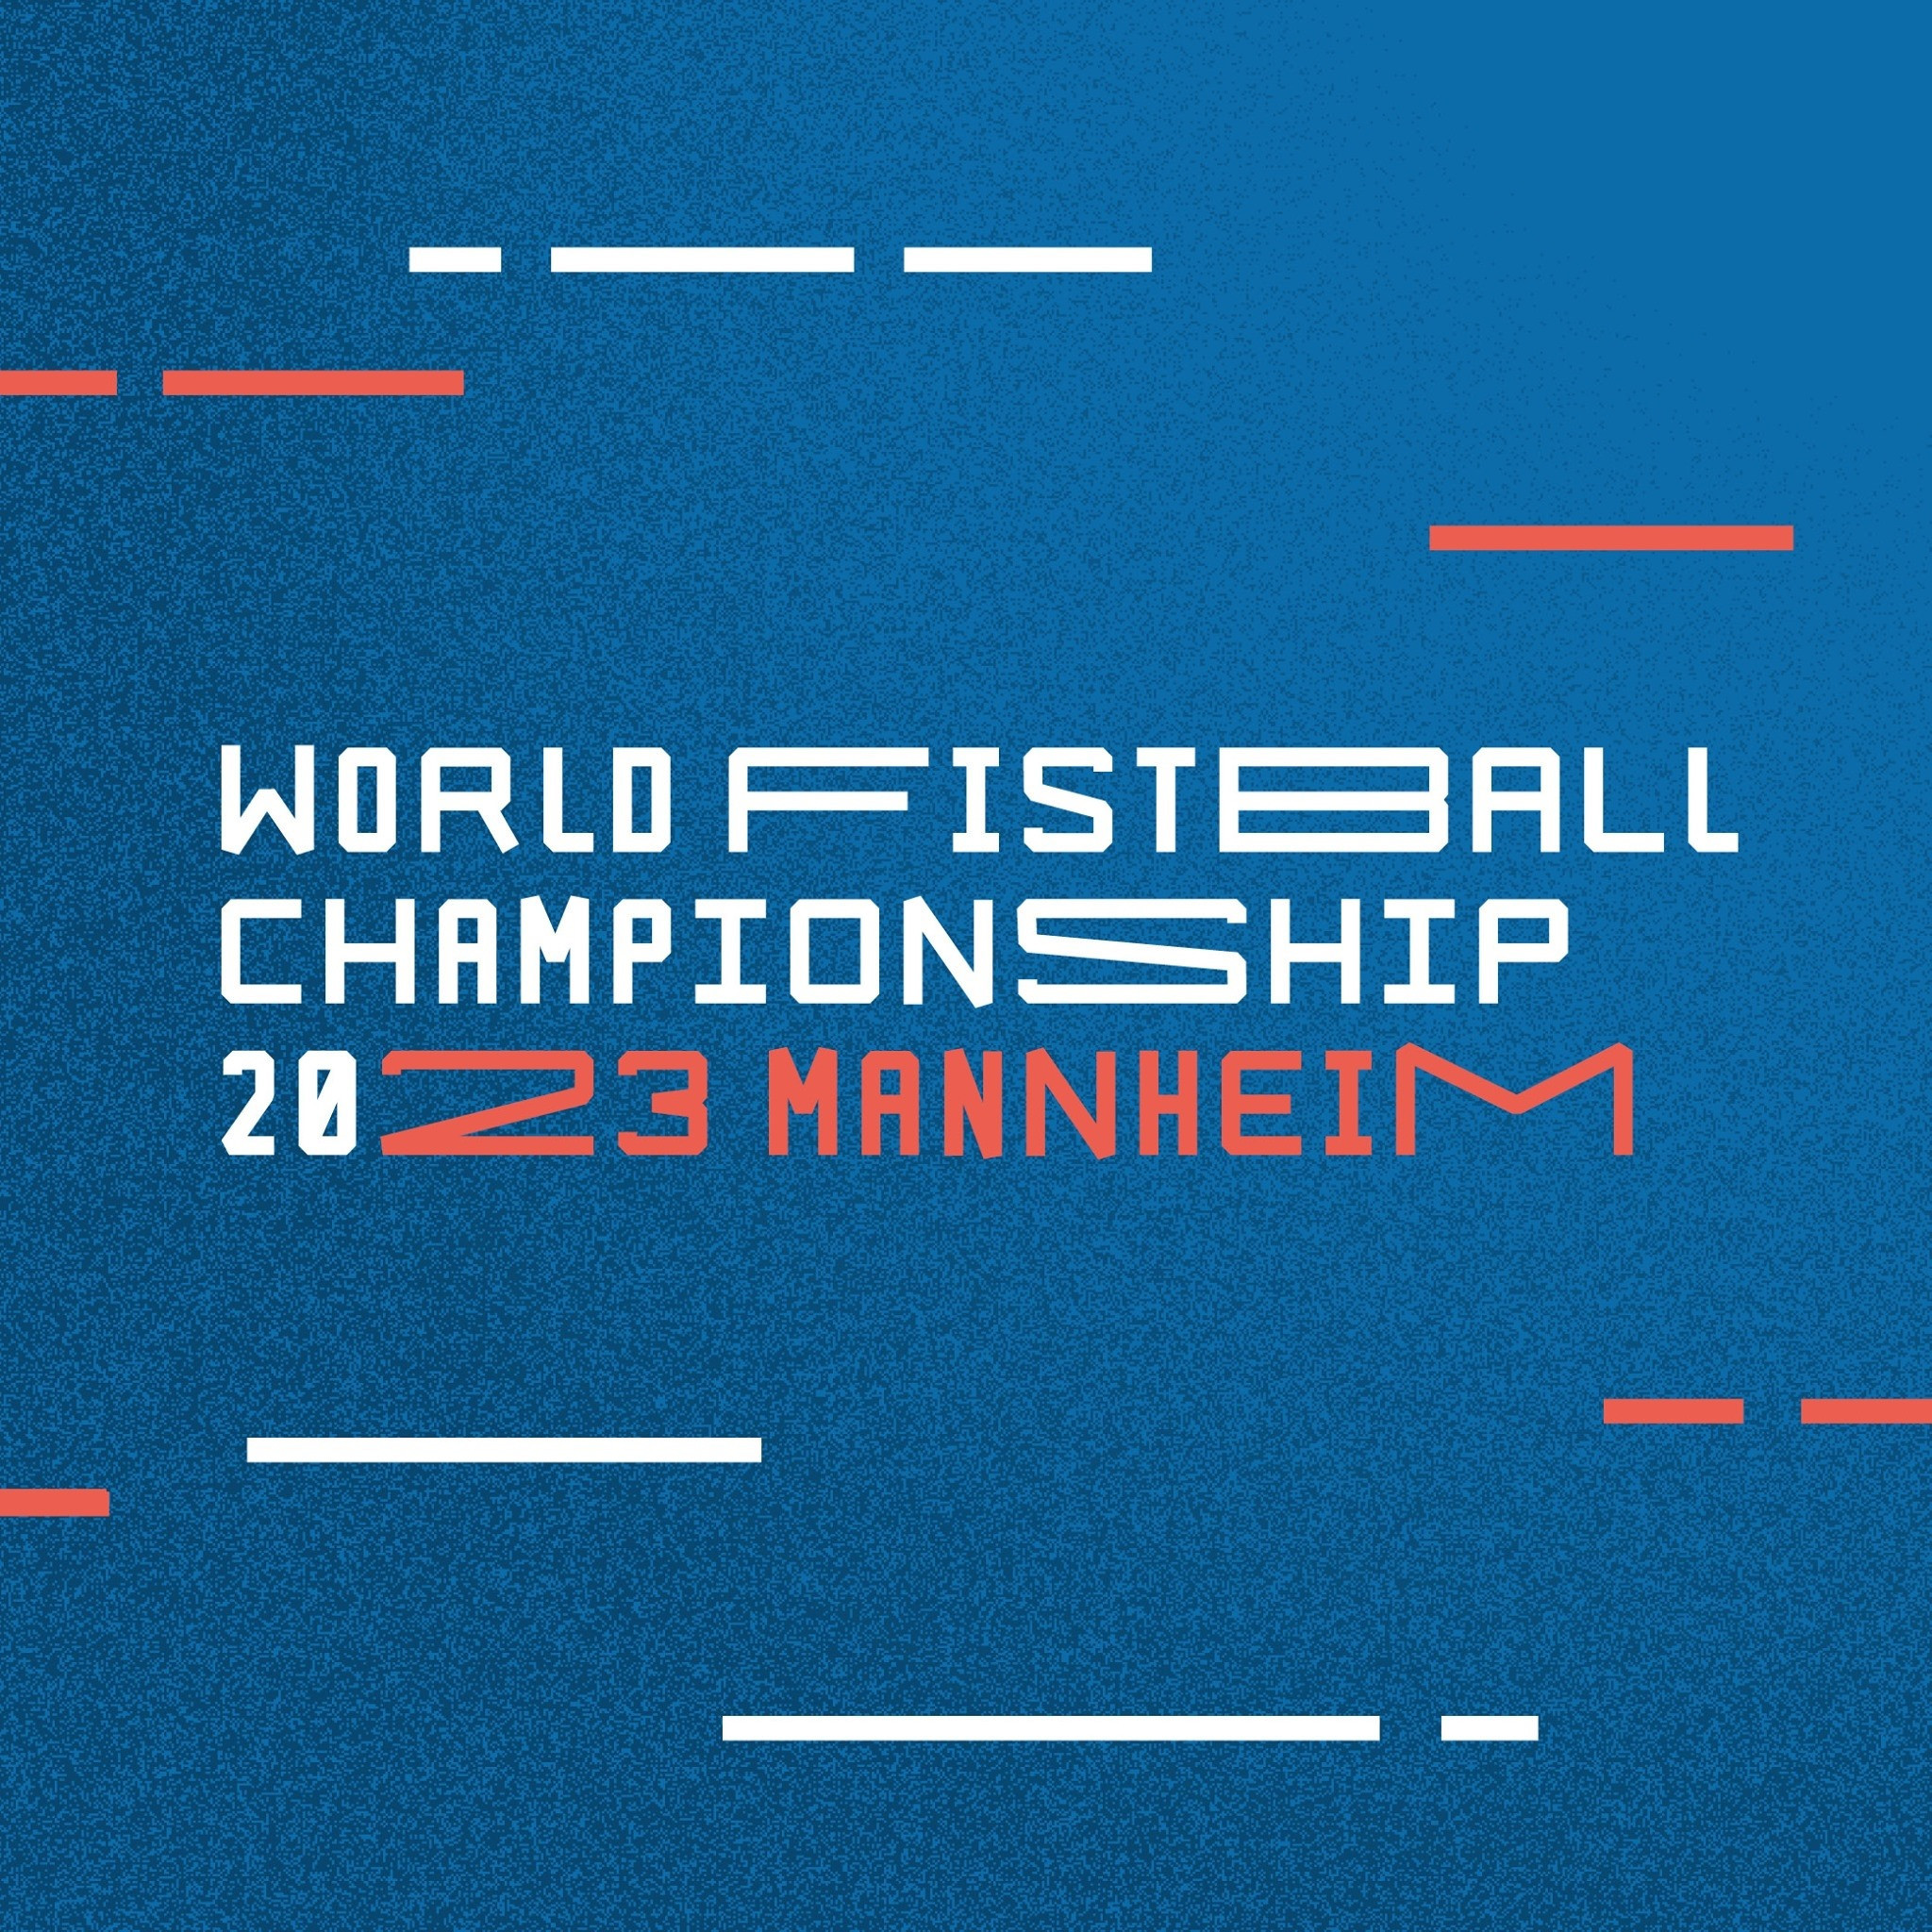 Germany won their fourth consecutive title at the Men's Fistball World Championship ©2023 Men's Fistball World Championship